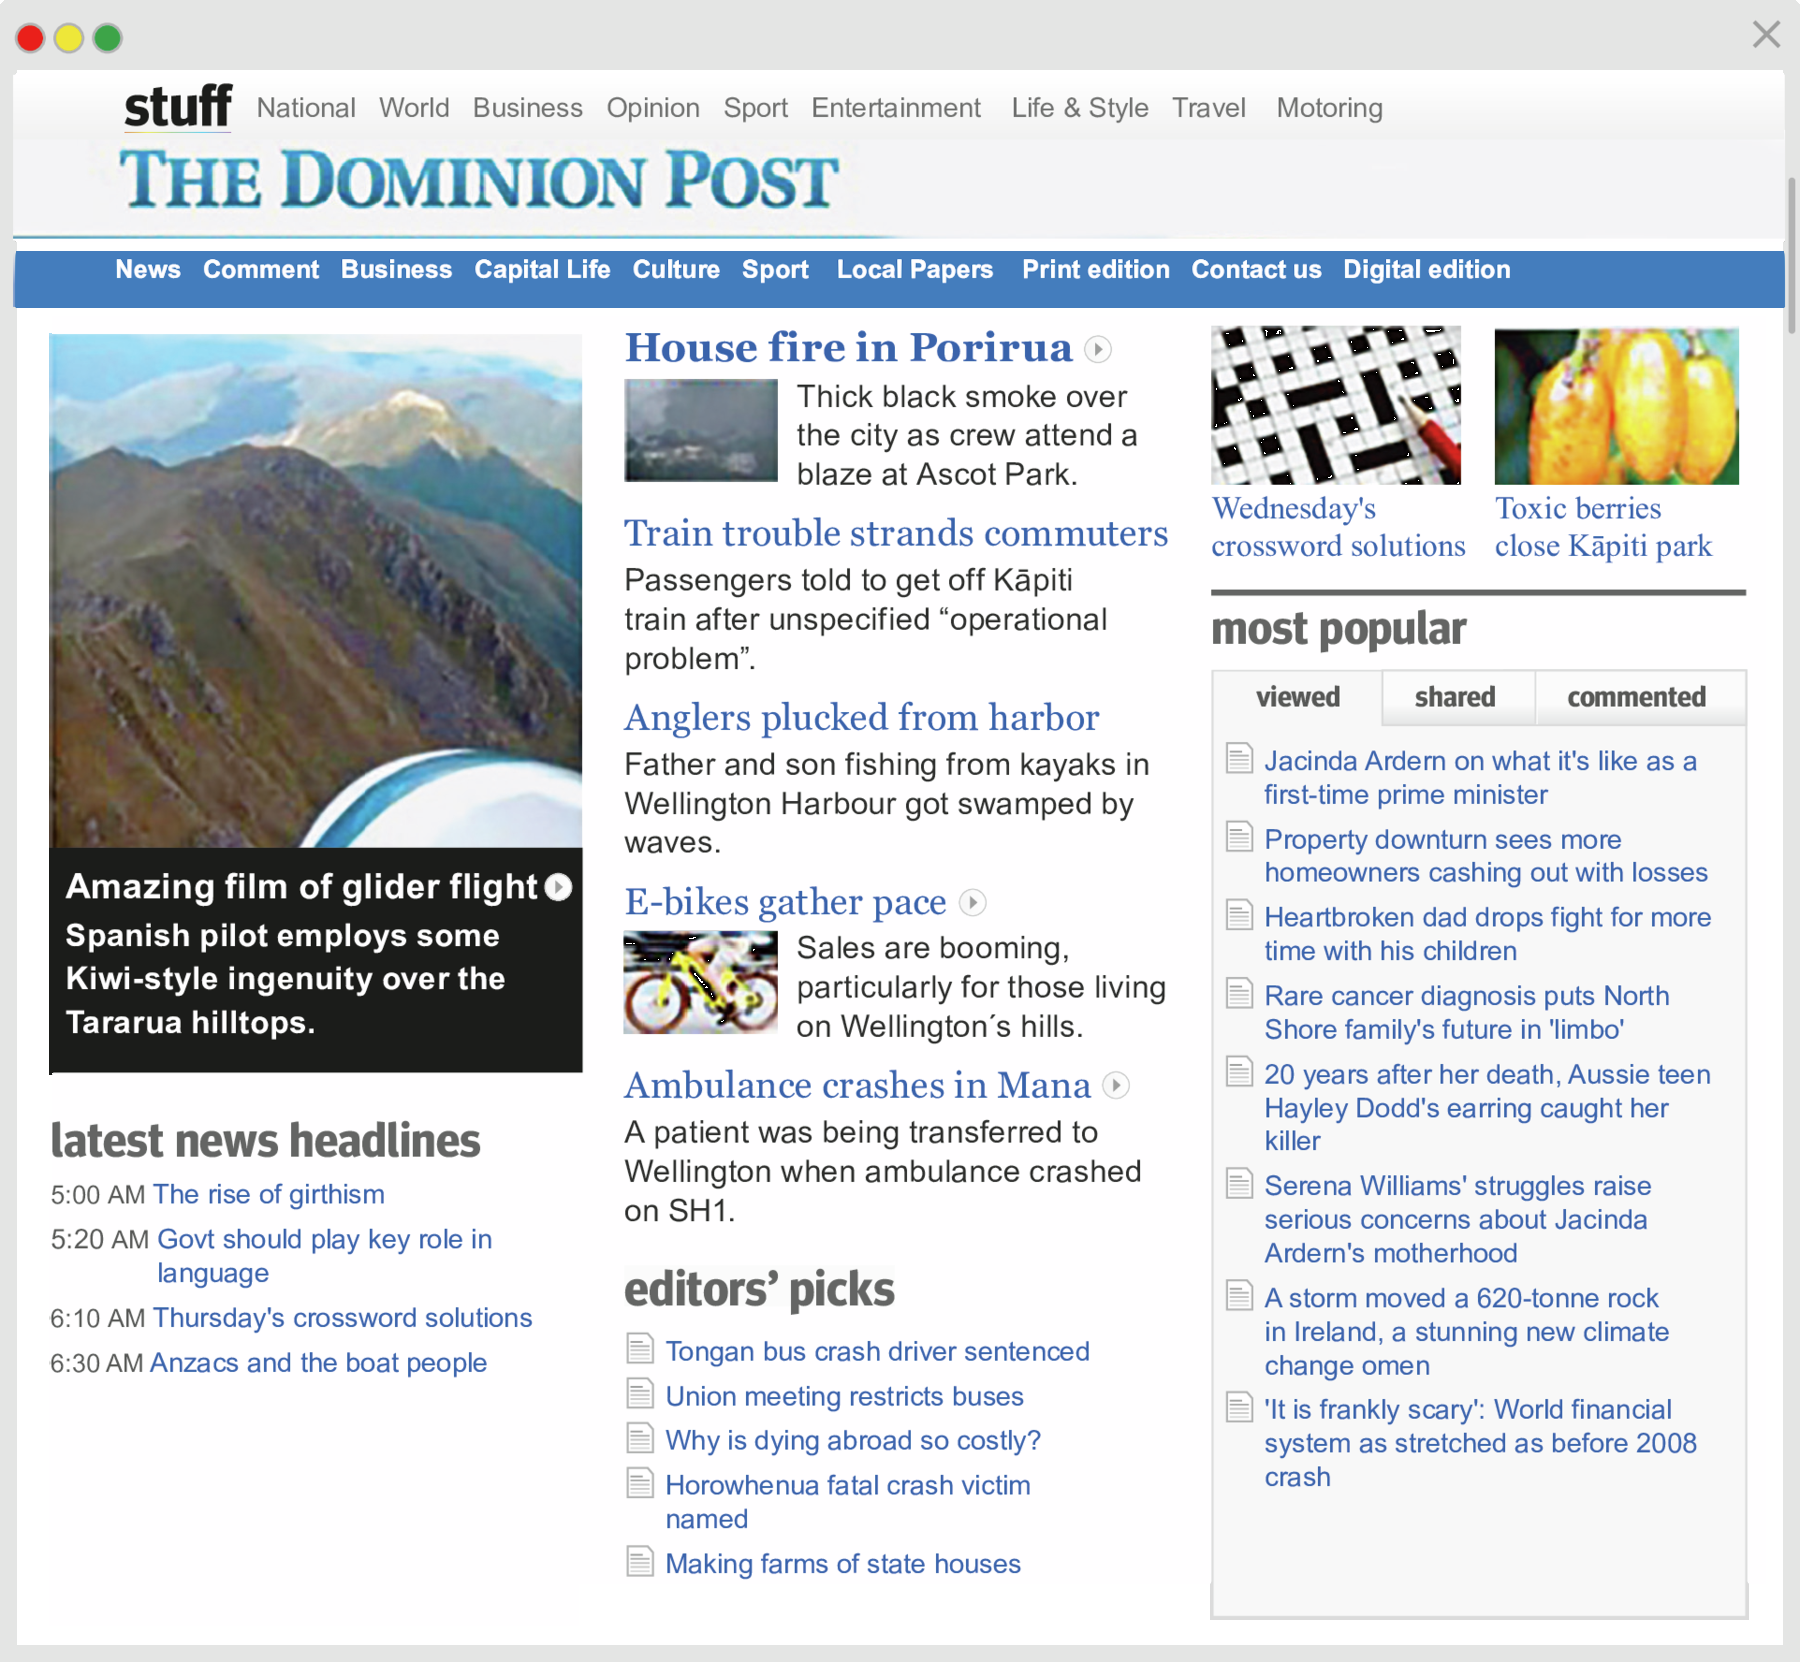 Reprodução de página de internet. Jornal online. Na parte superior do texto, texto: stuff. Menus: National, World, Business, Opinion, Sport, Entertainment, Life AND Style, Travel e Motoring. Título: The Dominion Post. Mais abaixo, outros menus: News, Comment, Business, Capital Life, Culture, Sport, Local Papers, Print edition, Contact us, Digital edition. Na parte inferior, à esquerda, fotografia de local aberto, com morros marrons, céu azul e texto: Amazing film of glider flight Spanish pilot employs some Kiwi-style ingenuity over the Tararua hilltops. Na parte inferior, à esquerda, texto: latest news headlines. Five AM, The rise of girthism. Five twenty AM, Government should play key role in language. Six ten AM, Thursday's crossword solutions. Six thirty AM, Anzacs and the boat people. Ao centro, texto: House fire in Porirua, Thick black smoke over the city as crew attend a blaze at Ascot Park. Train trouble strands commuters. Passengers told to get off Kāpiti train after unspecified operational problem. Anglers plucked from harbor. Father and son fishing from kayaks in Wellington Harbour got swamped by waves. E-bikes gather pace. Sales are booming, particularly for those living on Wellington´s hills. Ambulance crashes in Mana. A patient was being transferred to Wellington when ambulance crashed on SH one. Editors' picks. Tongan bus crash driver sentenced. Union meeting restricts buses. Why is dying abroad so costly? Horowhenua fatal crash victim named. Making farms of state houses. No canto superior direito, fotografia de uma folha de um jogo de palavras cruzadas com ponta de lápis vermelho no canto inferior esquerdo. Texto: Wednesday's crossword solutions. Ao lado, há outra fotografia. Frutos de tamanho médio em amarelo. Texto: Toxic berries close Kāpiti park.Abaixo das fotos, outros links para matérias com os seguintes textos: most popular. viewed, shared, commented. Jacinda Ardern on what it's like as a first-time prime minister. Property downturn sees more homeowners cashing out with losses. Heartbroken dad drops fight for more time with his children. Rare cancer diagnosis puts North. Shore family's future in 'limbo' twenty years after her death, Aussie teen Hayley Dodd's earring caught her killer. Serena Williams' struggles raise serious concerns about Jacinda Ardern's motherhood. A storm moved a six hundred and twenty tonne rock in Ireland, a stunning new climate change omen. It is frankly scary: World financial system as stretched as before two thousand and eight crash.